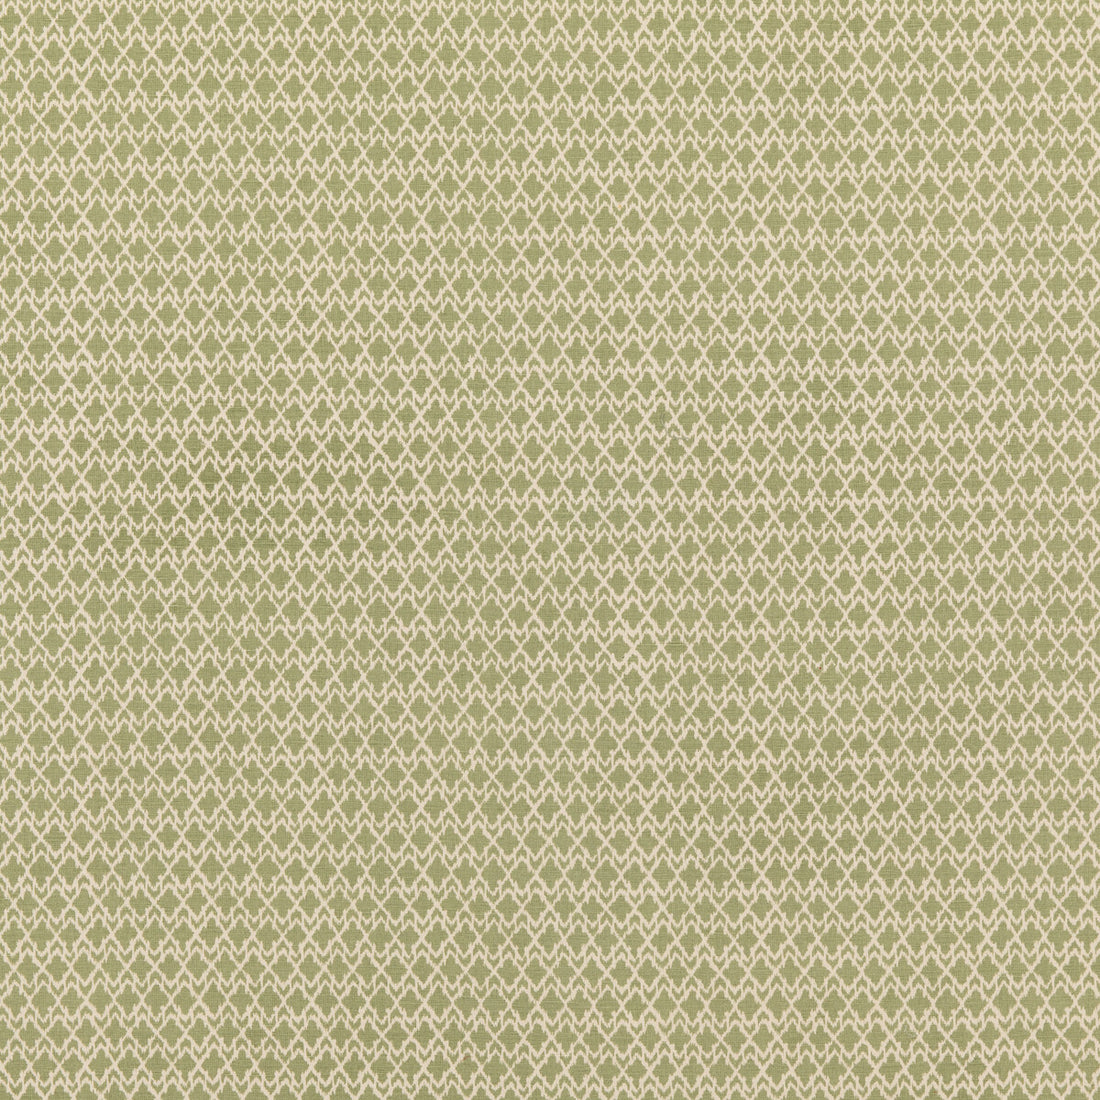 Merrin fabric in green color - pattern BP10889.4.0 - by G P &amp; J Baker in the Chifu collection